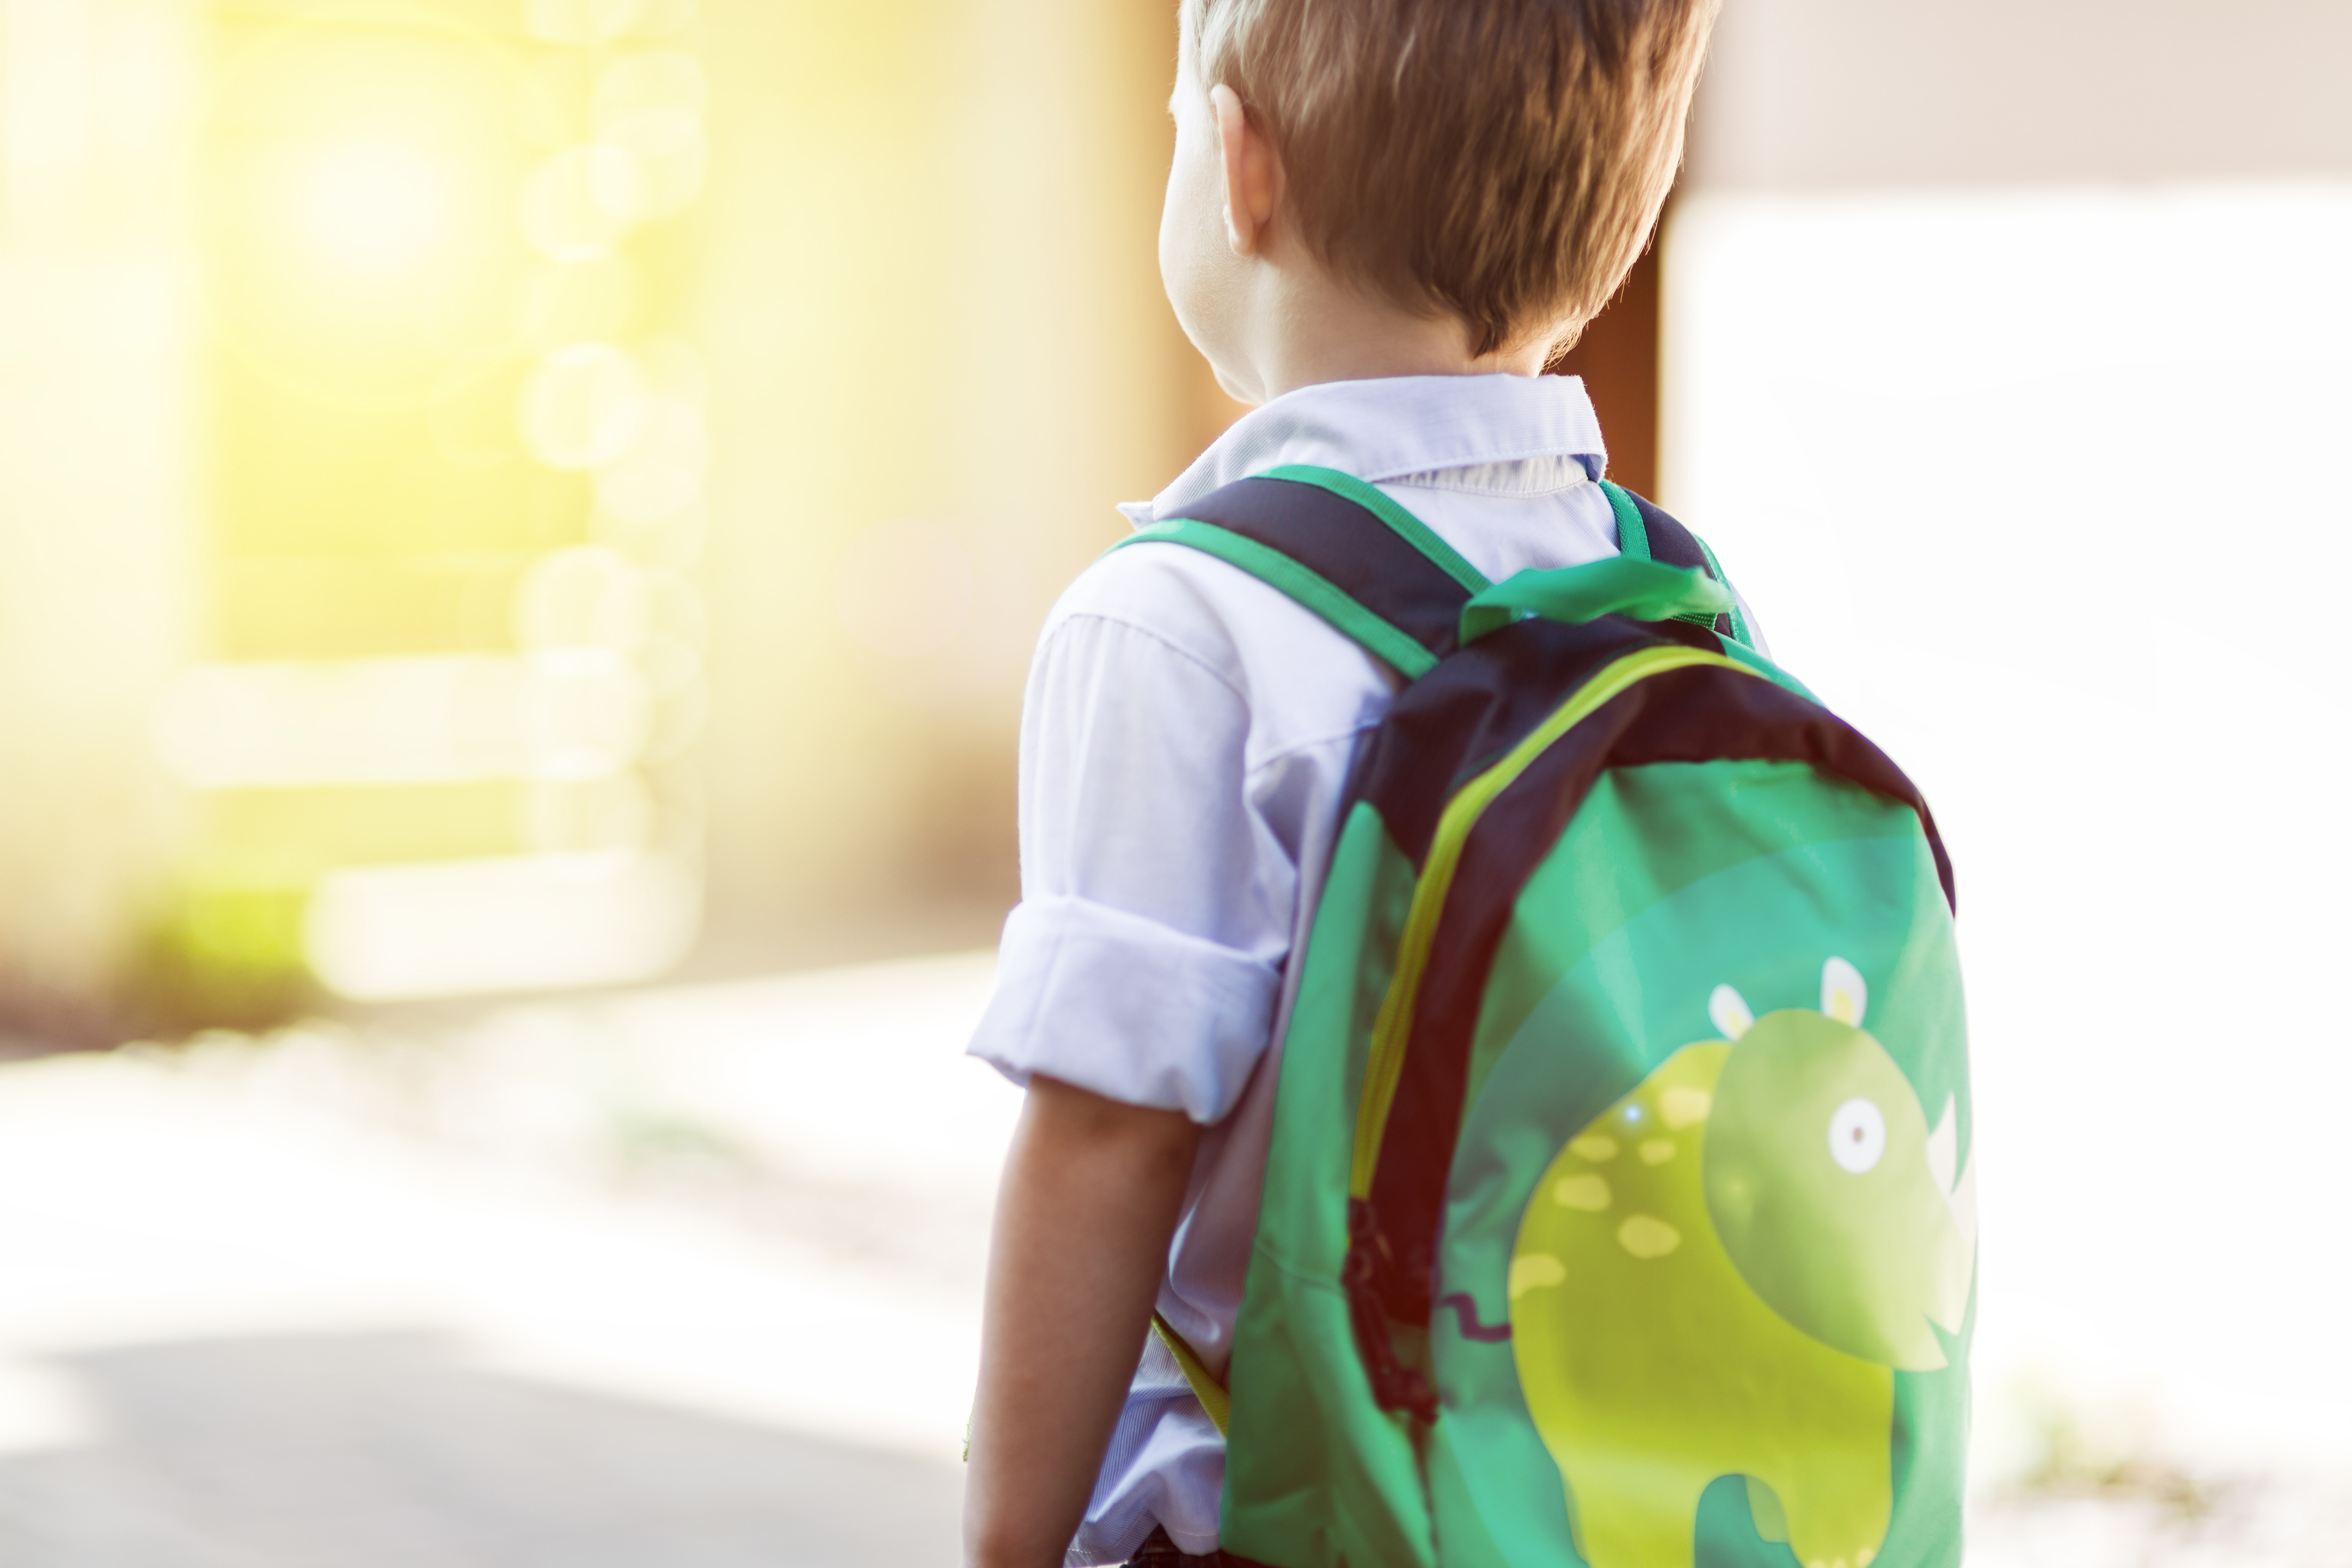 Preparing Your Child (And You) For Their First Day of School